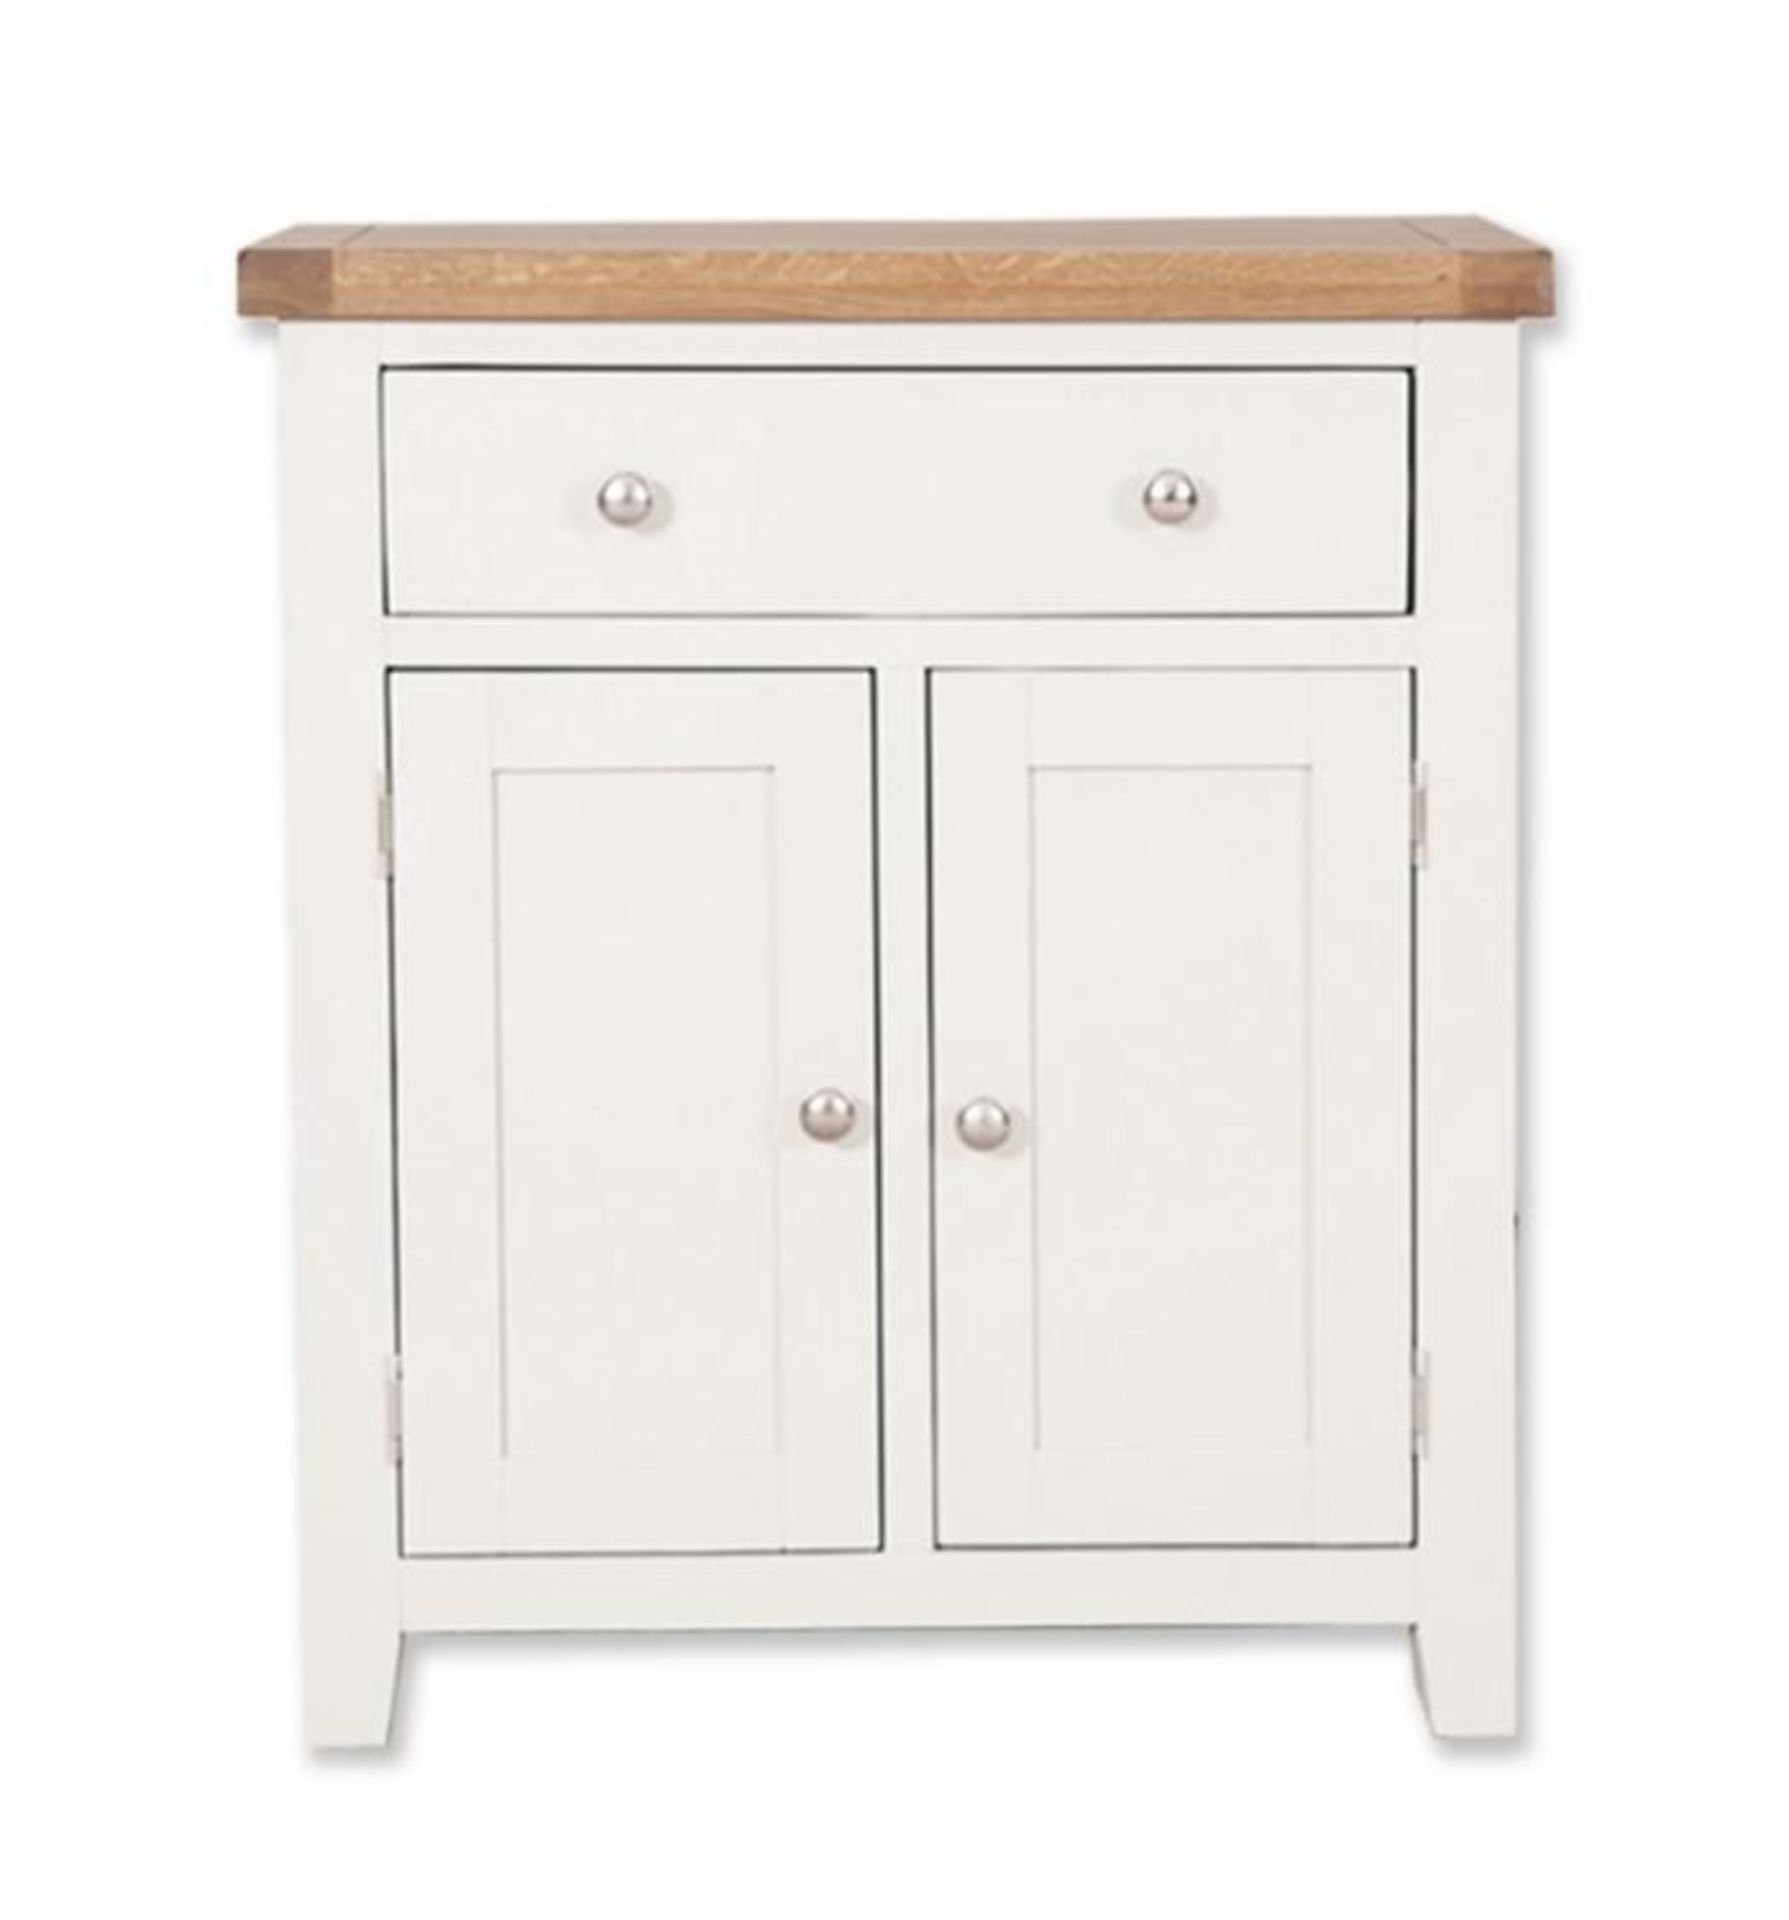 *BRAND NEW* Melbourne hall cabinet in white and oak top. RRP: £299.00